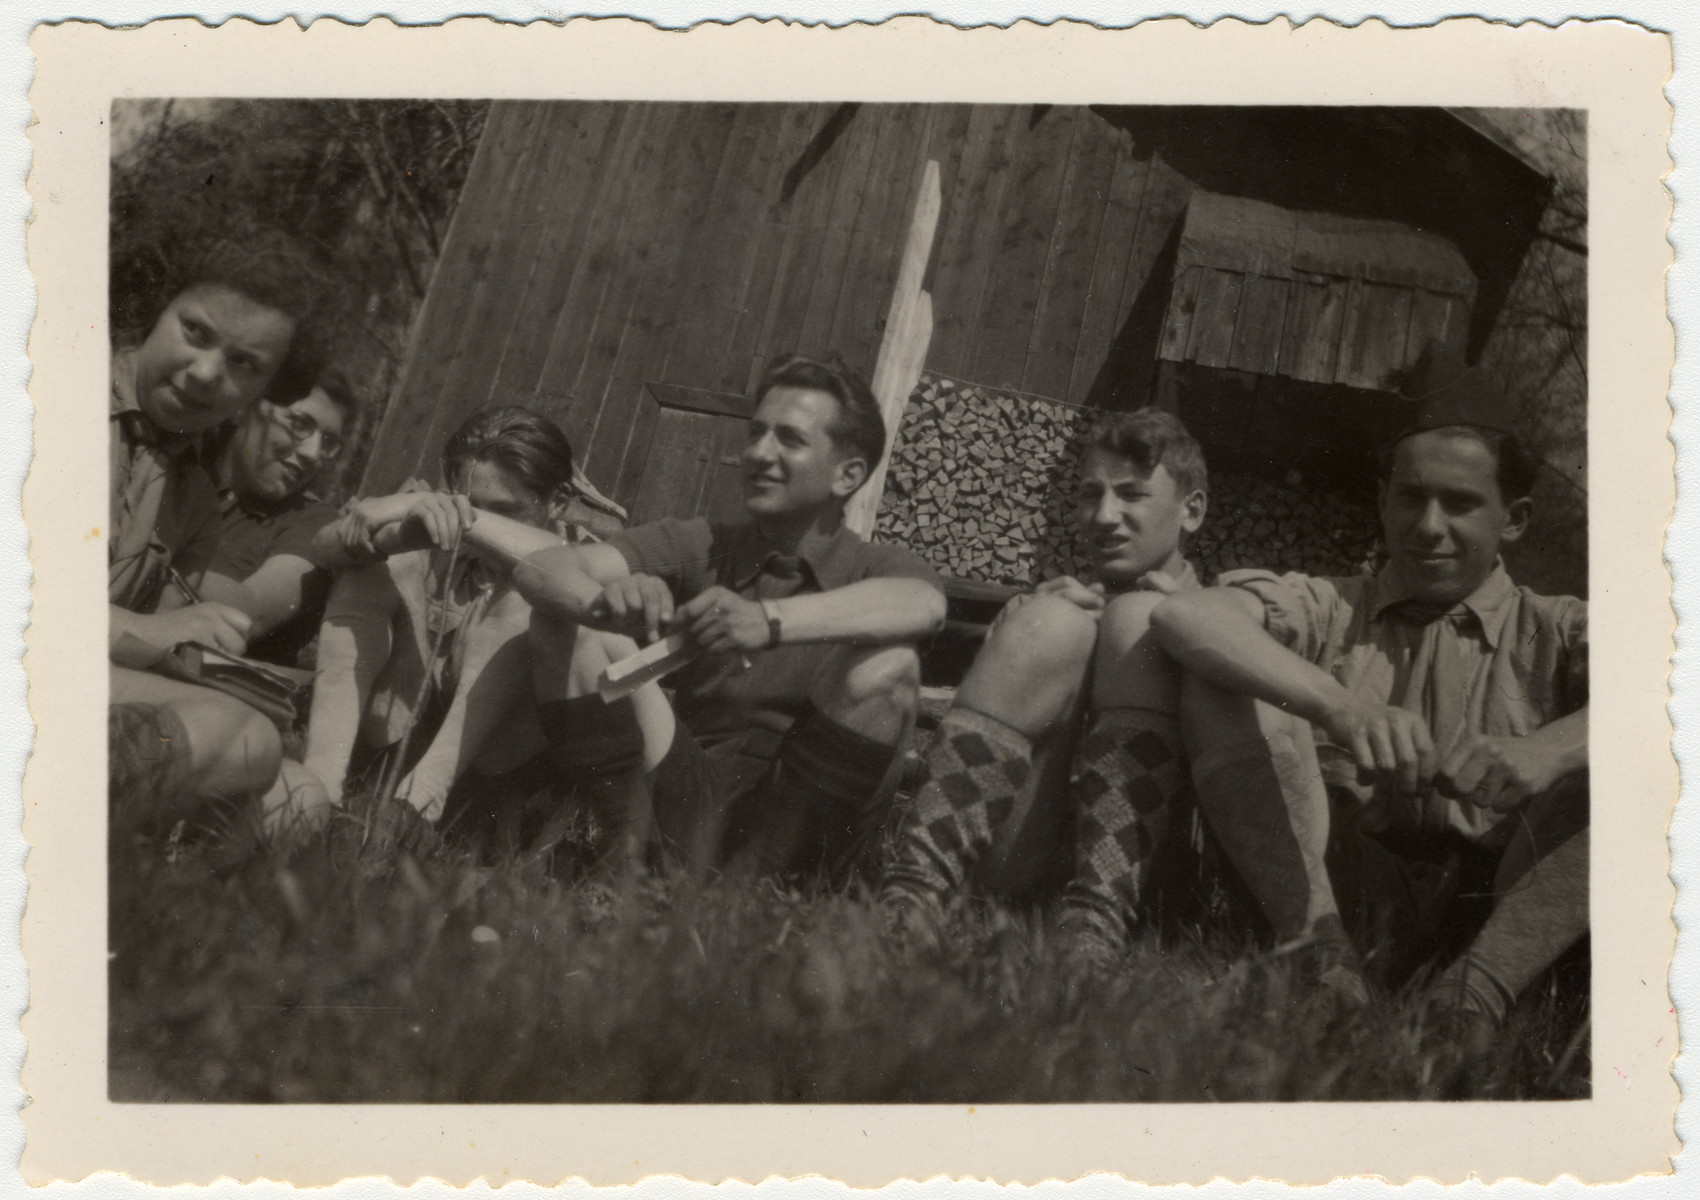 Lily Bornstein, Inge, Rudi, Yosef, Bruno Lewin, and Teddy Browar sit outdoors for a discussion at their camp in Elgg.